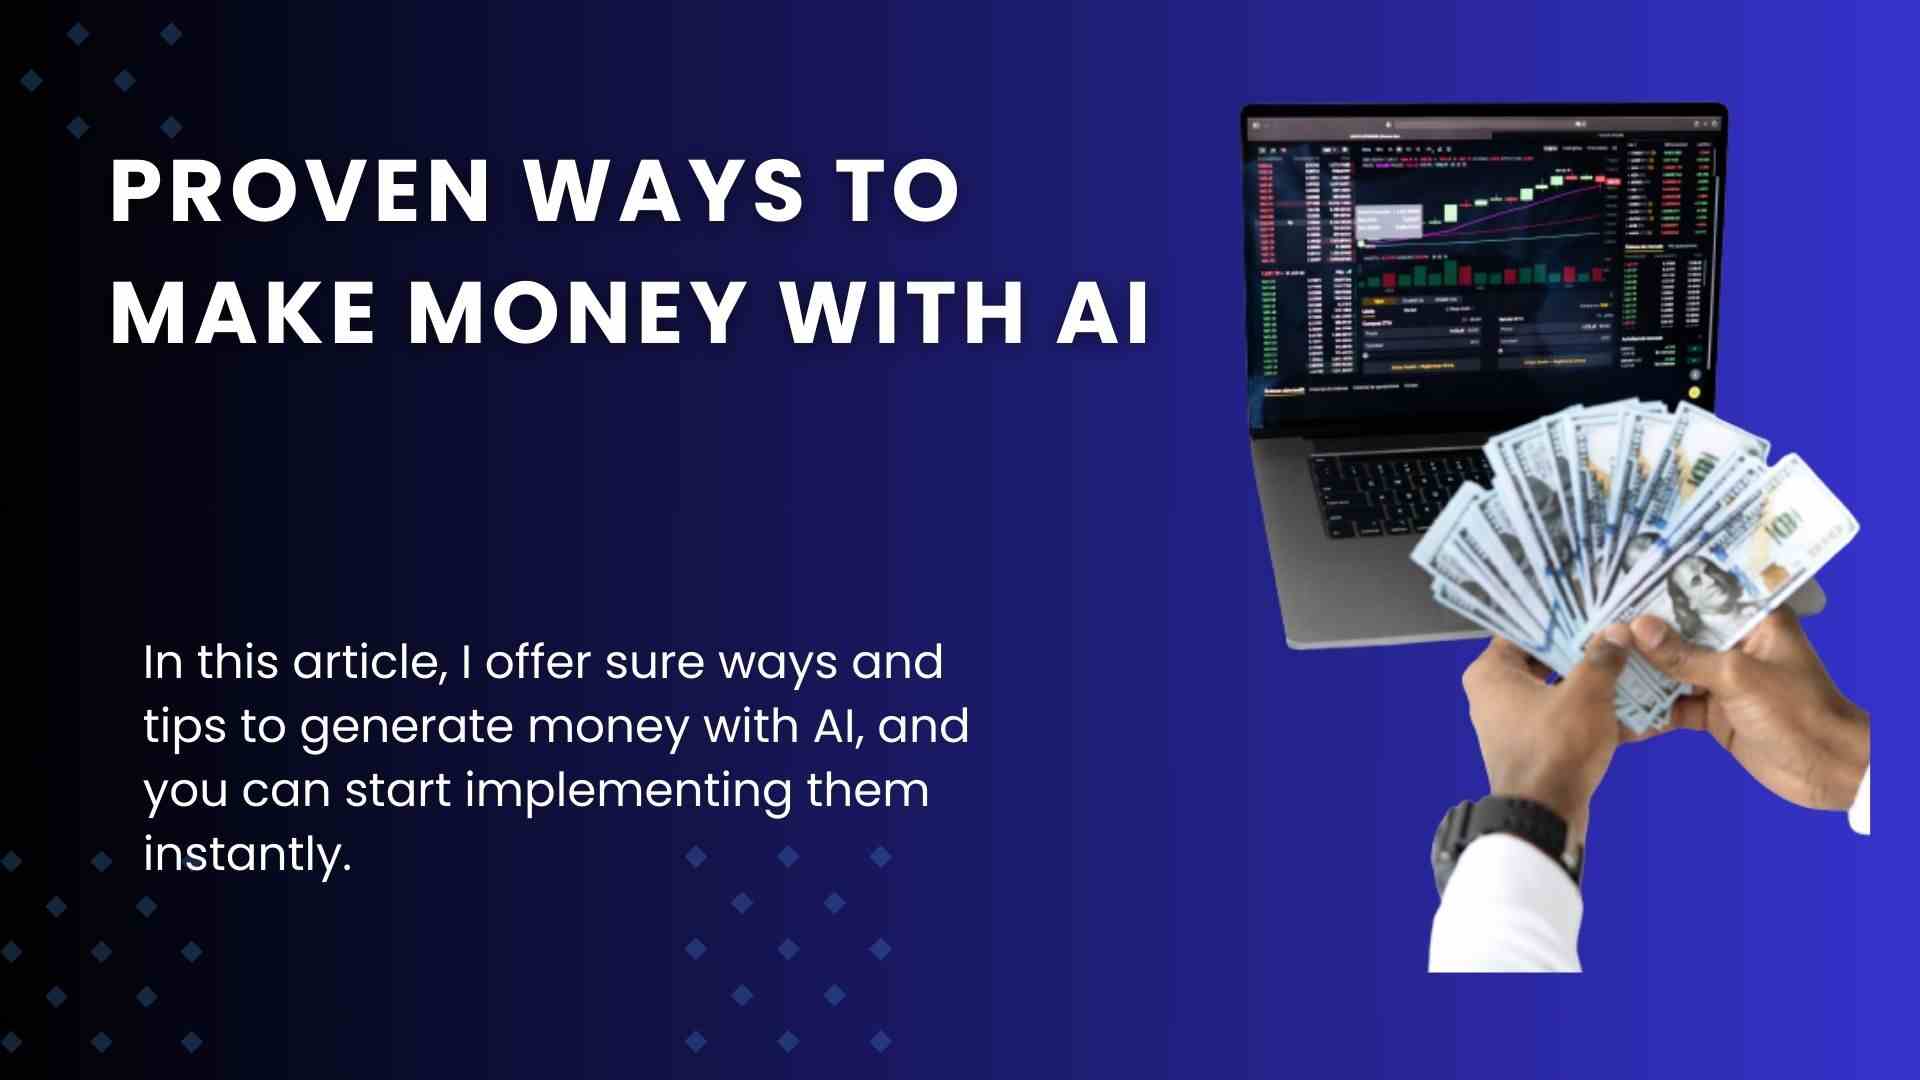 Proven ways to make money with AI.